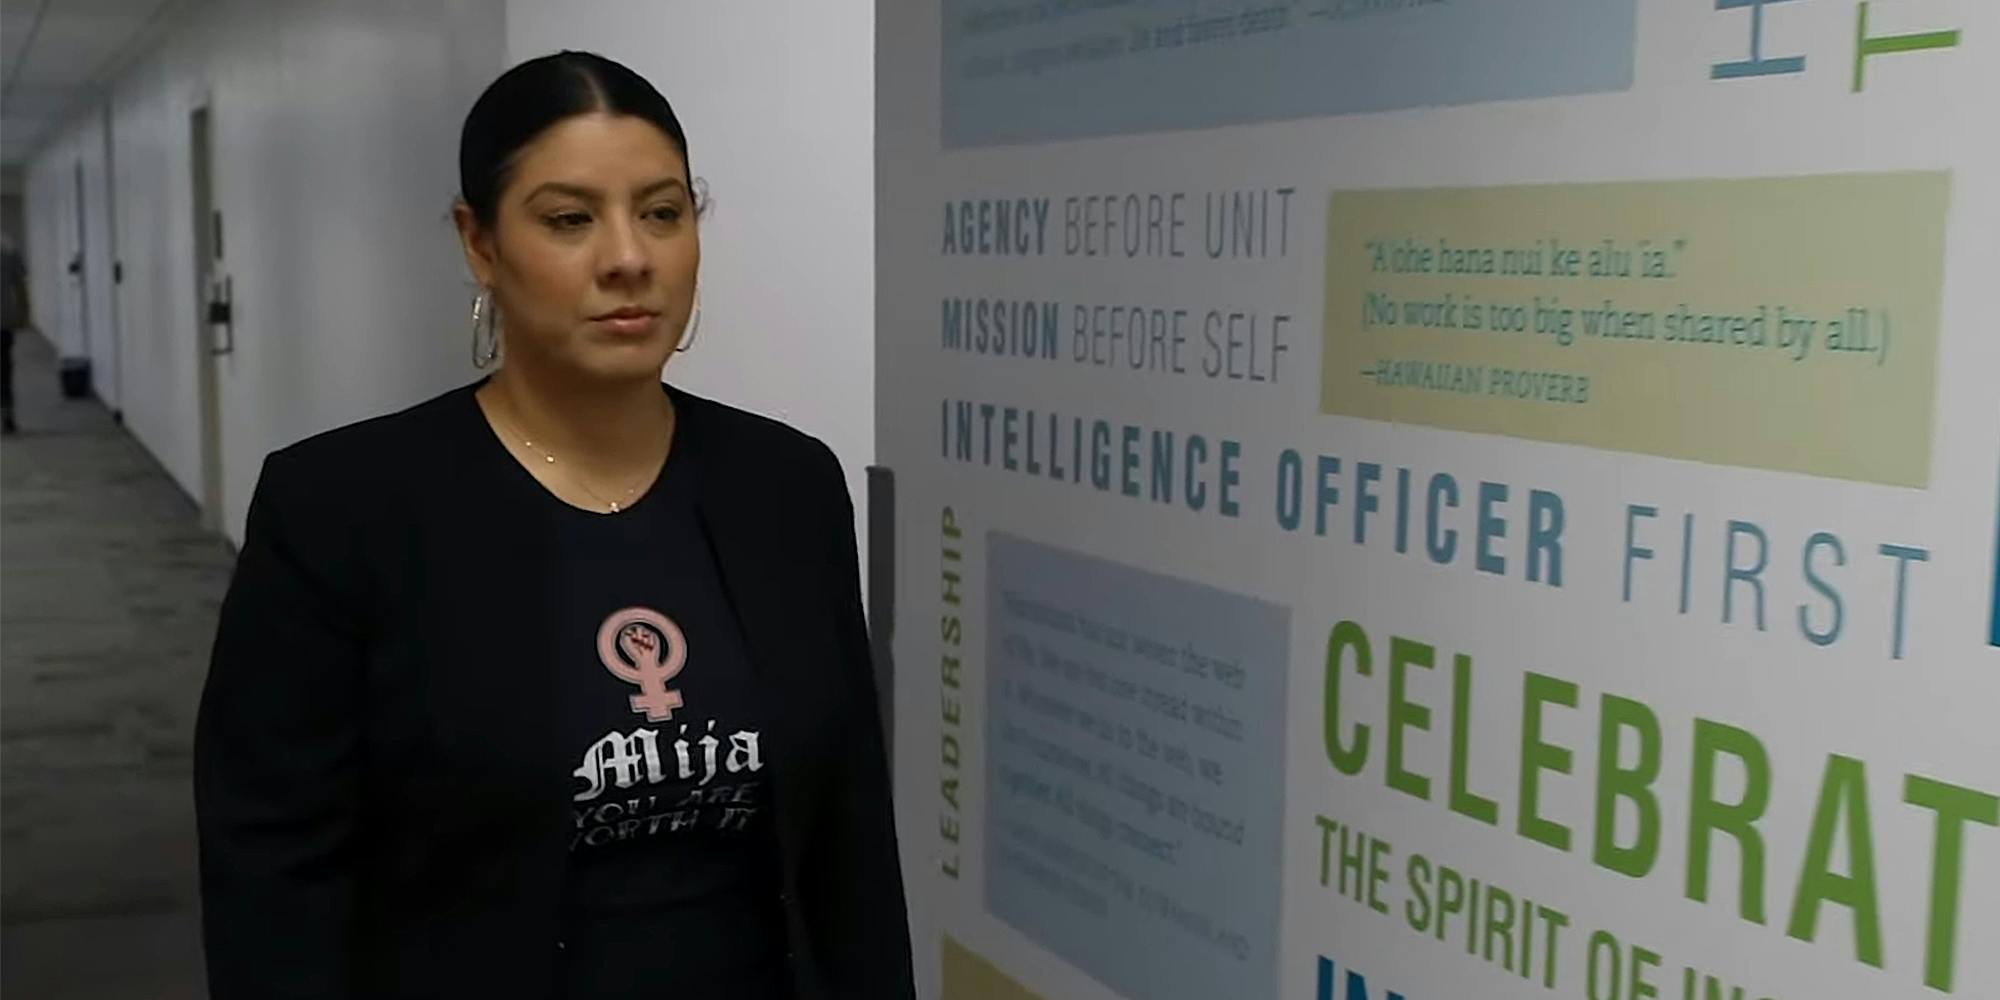 woman in "Mija you are worth it" t-shirt walks past CIA wall art that reads "Agency before unit, Mission before self, Intelligence officer first"